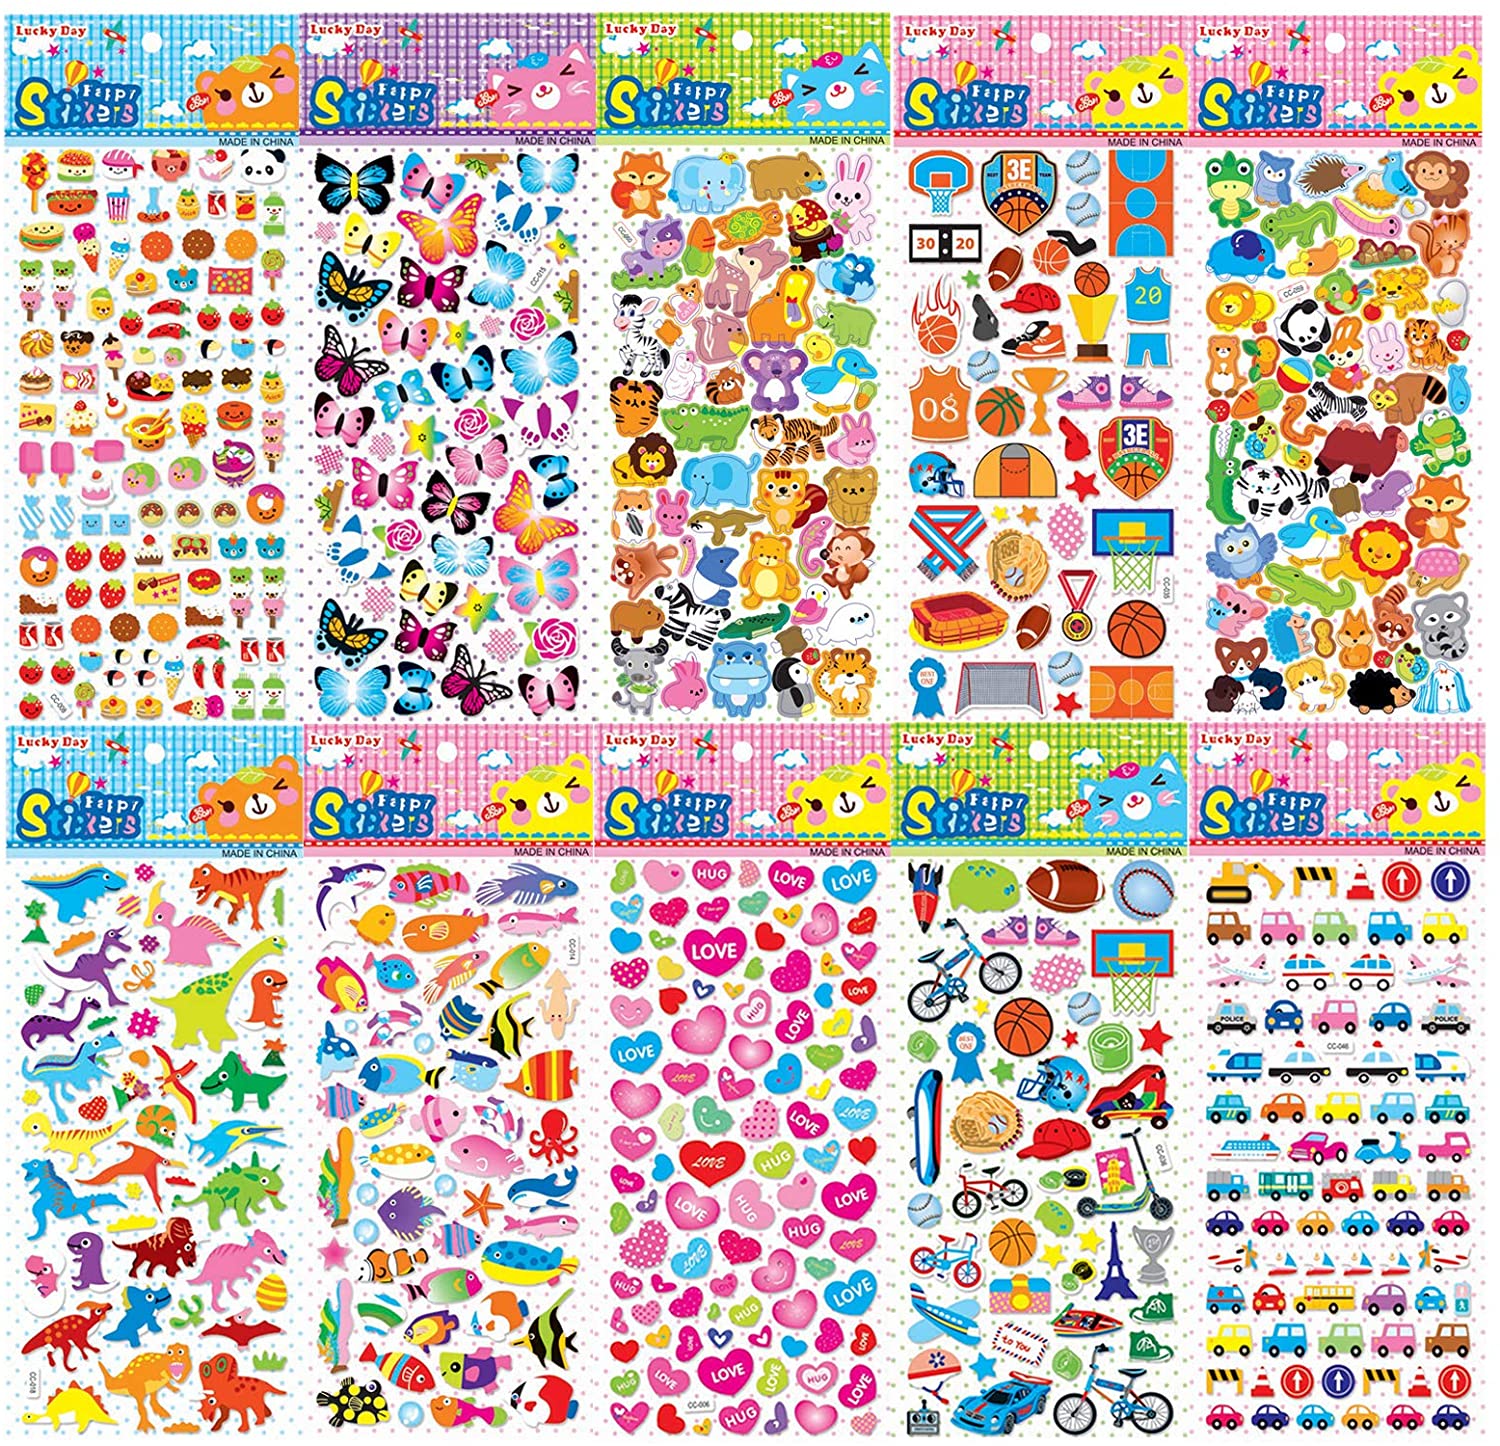 JCF 3D Puffy Stickers Self Adhesive and Children 24 Different Sheets Stickers Including Animals Dinosaurs Cars Hearts Fruits Numbers for DIY Crafts Scrapbooking and Rewarding 